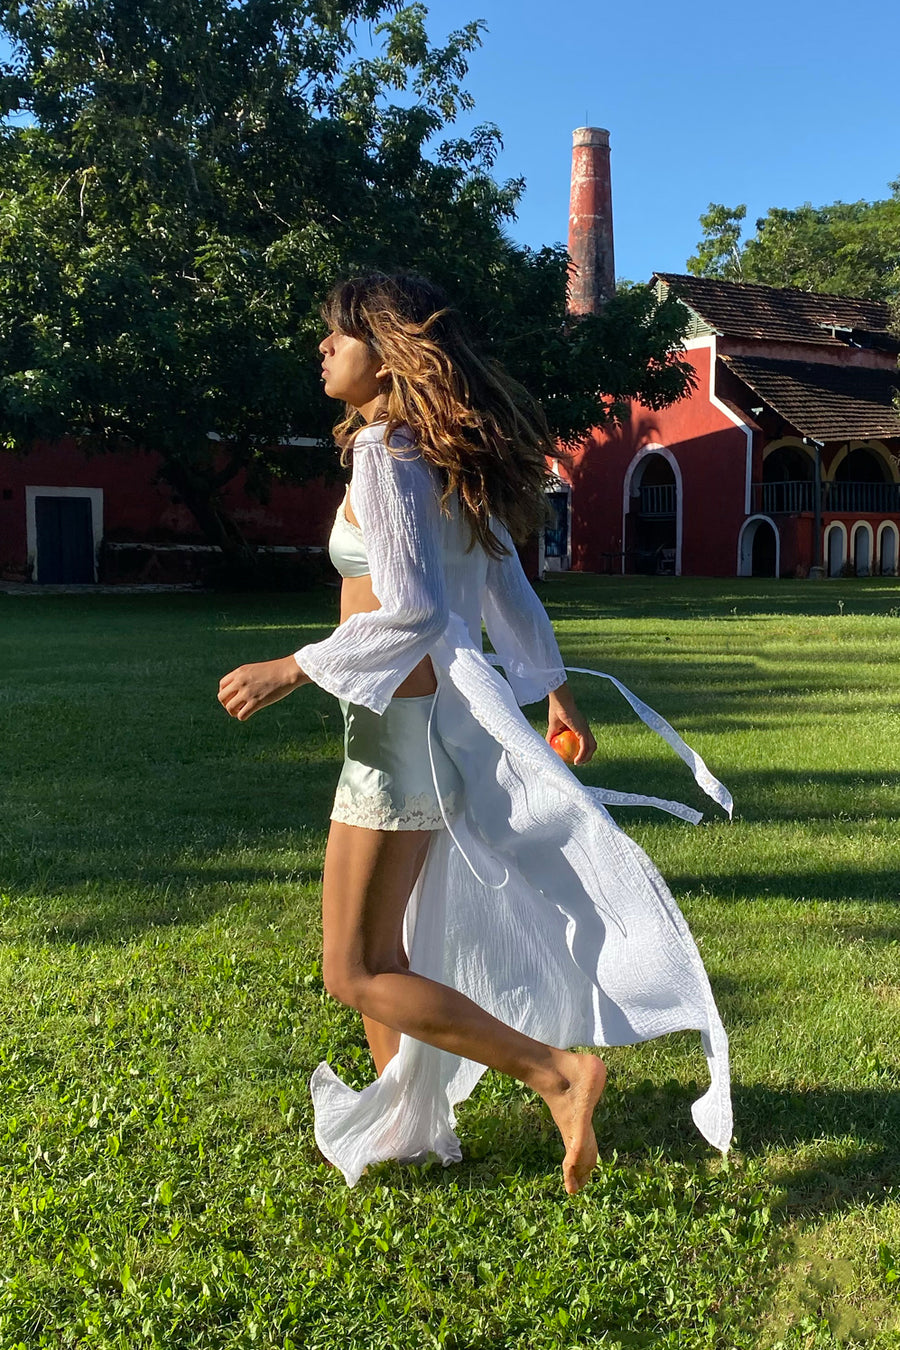 This is a photo of a woman running on grass wearing a seafoam-colored silk set with shorts and bra top. Overtop, she has a white cotton gauze robe.